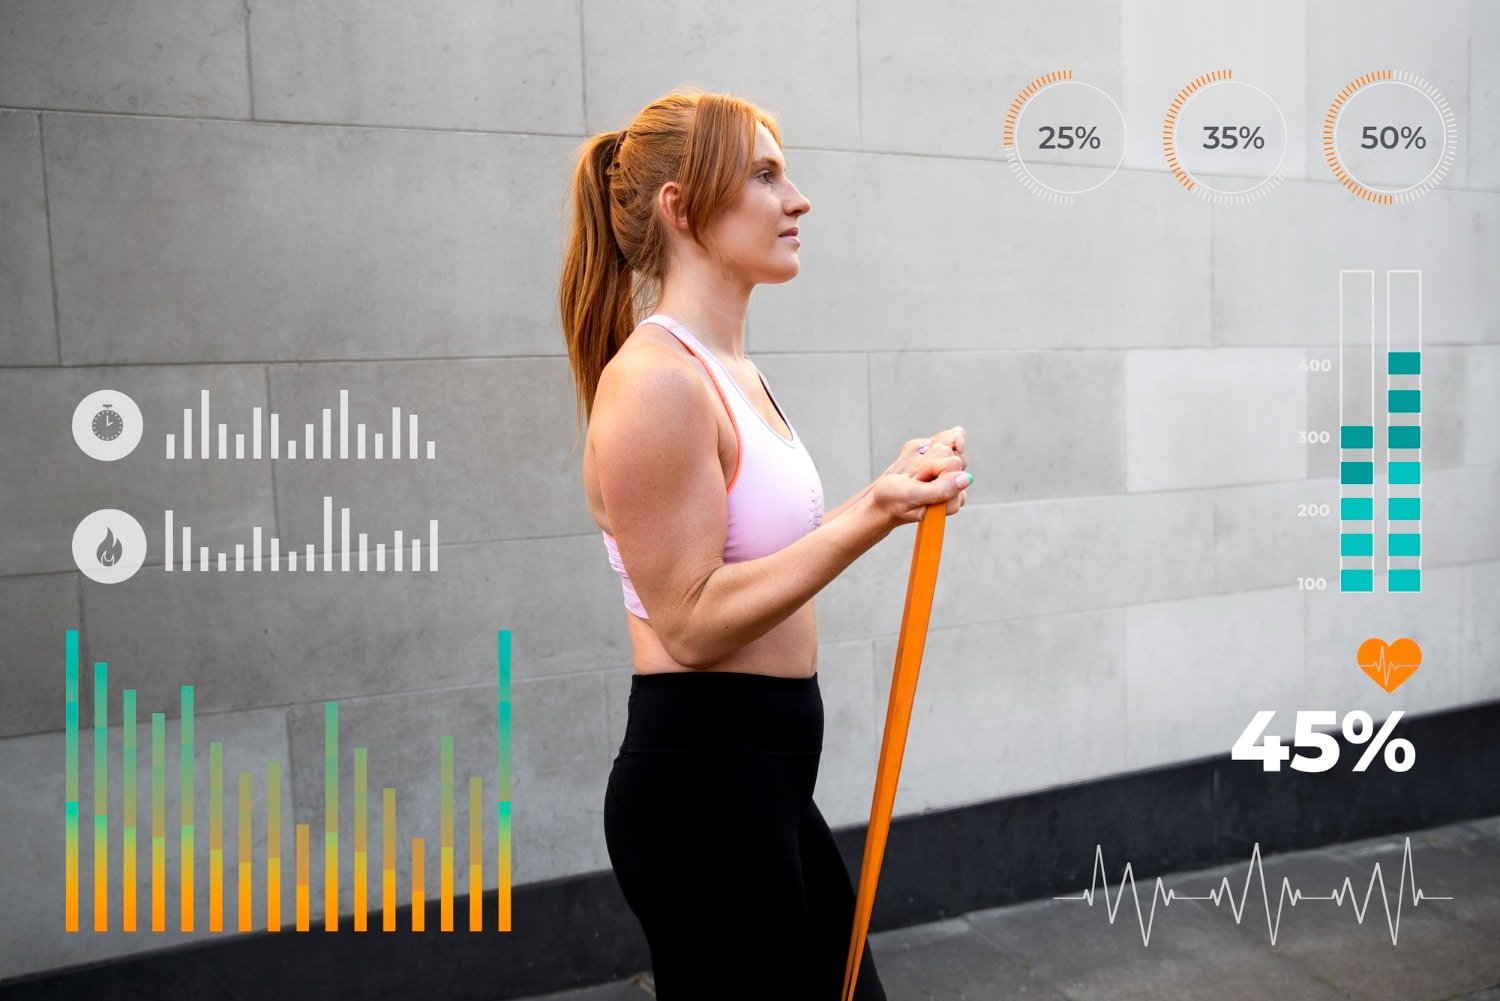 NordicTrack Fitness Innovations for a Healthier Lifestyle